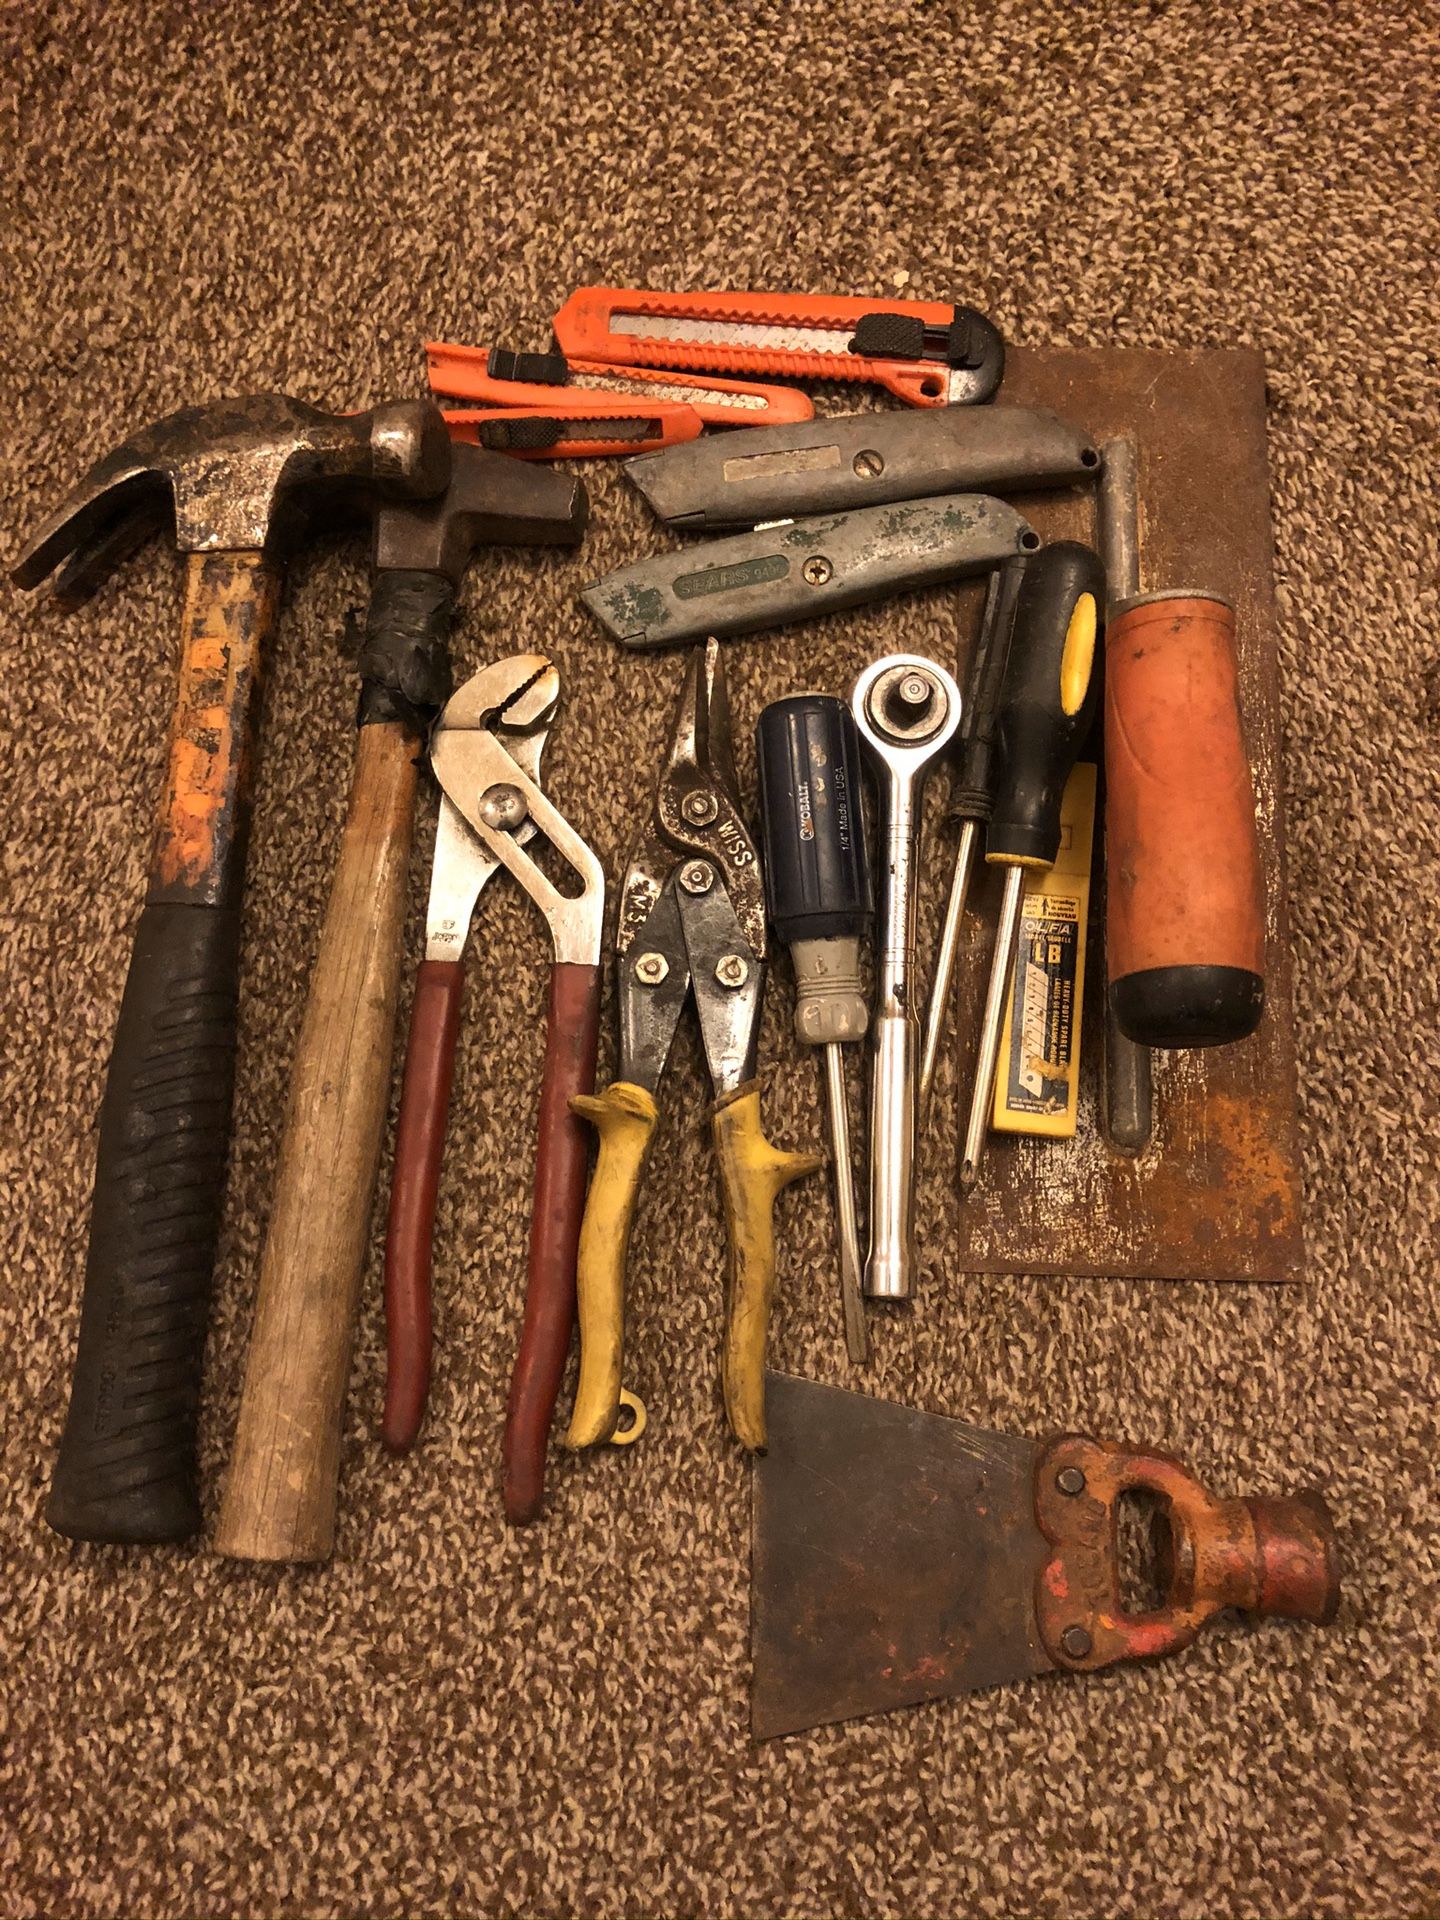 A bunch of old tools